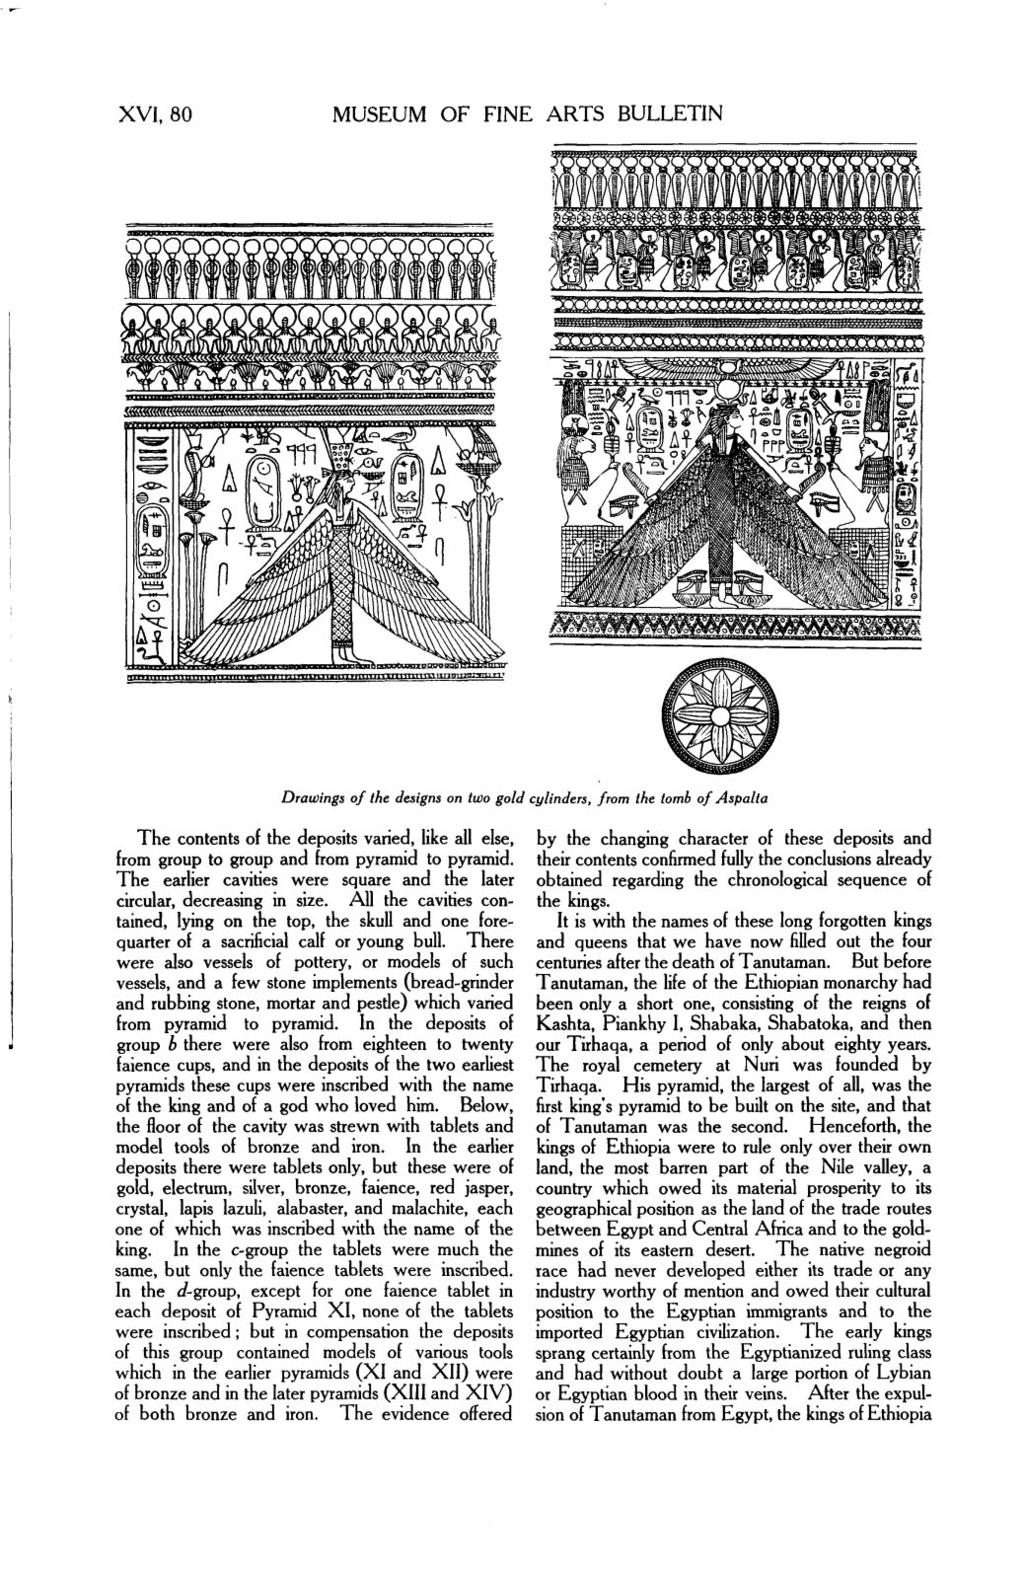 XVI, 80 MUSEUM OF FINE ARTS BULLETIN Drawings of the designs on two gold cylinders, from the tomb of Aspalta The contents of the deposits varied, like all else, by the changing character of these